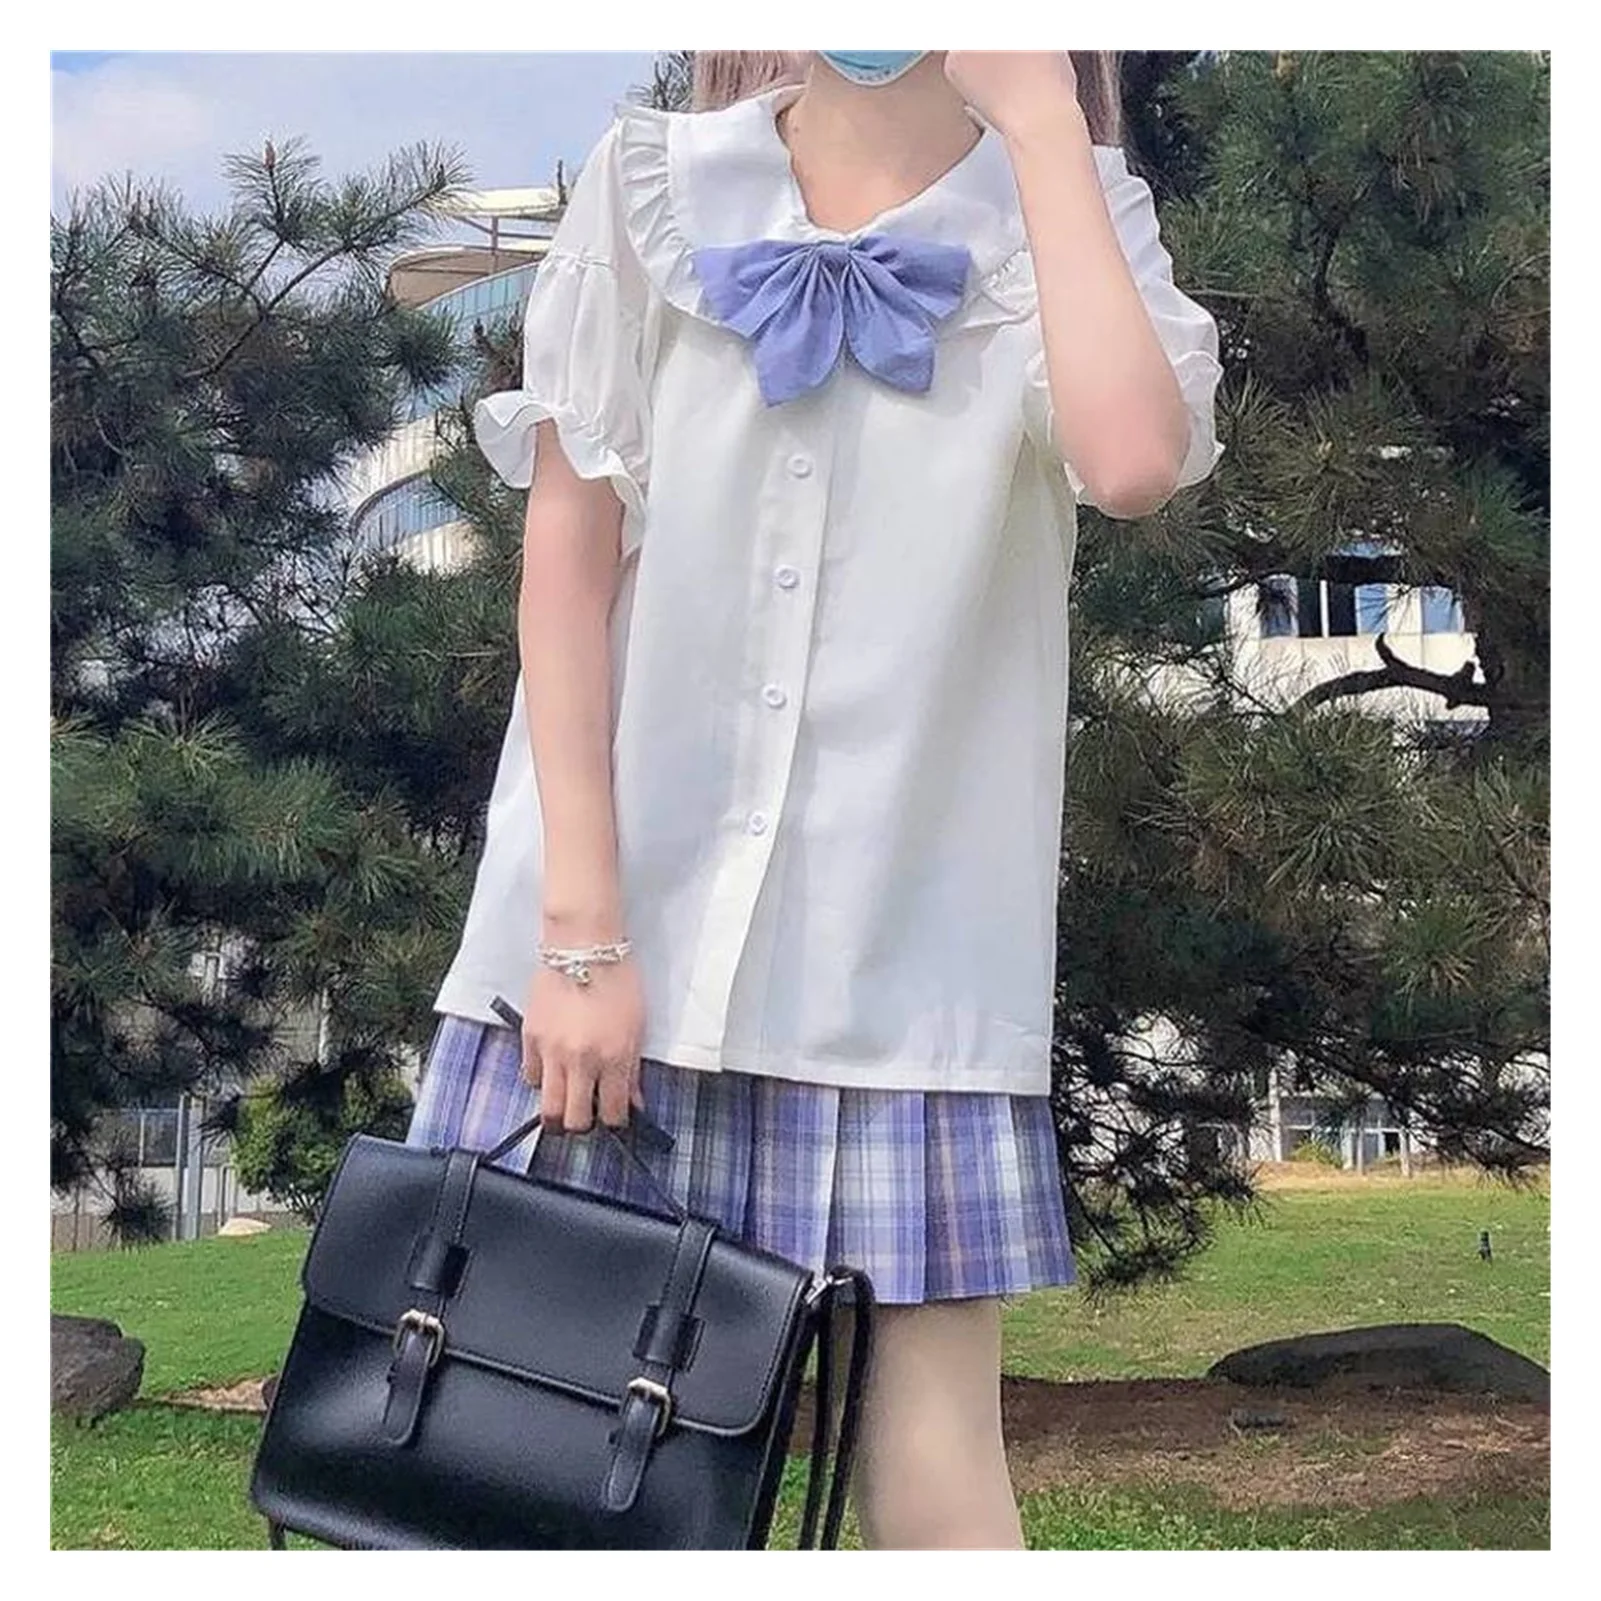 

Japanese lovely White Chiffon Blouse academy style sweet Peter Pan collar shirt holiday outdoor Ruffle Top 2021 spring new